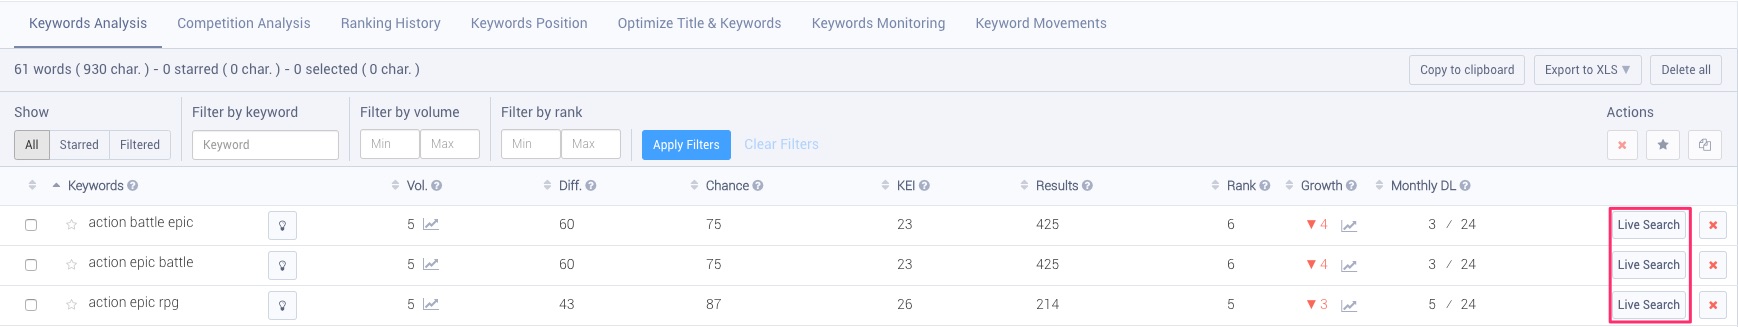 Check out AppTweak's new Live Search in the Keywords Analysis table 